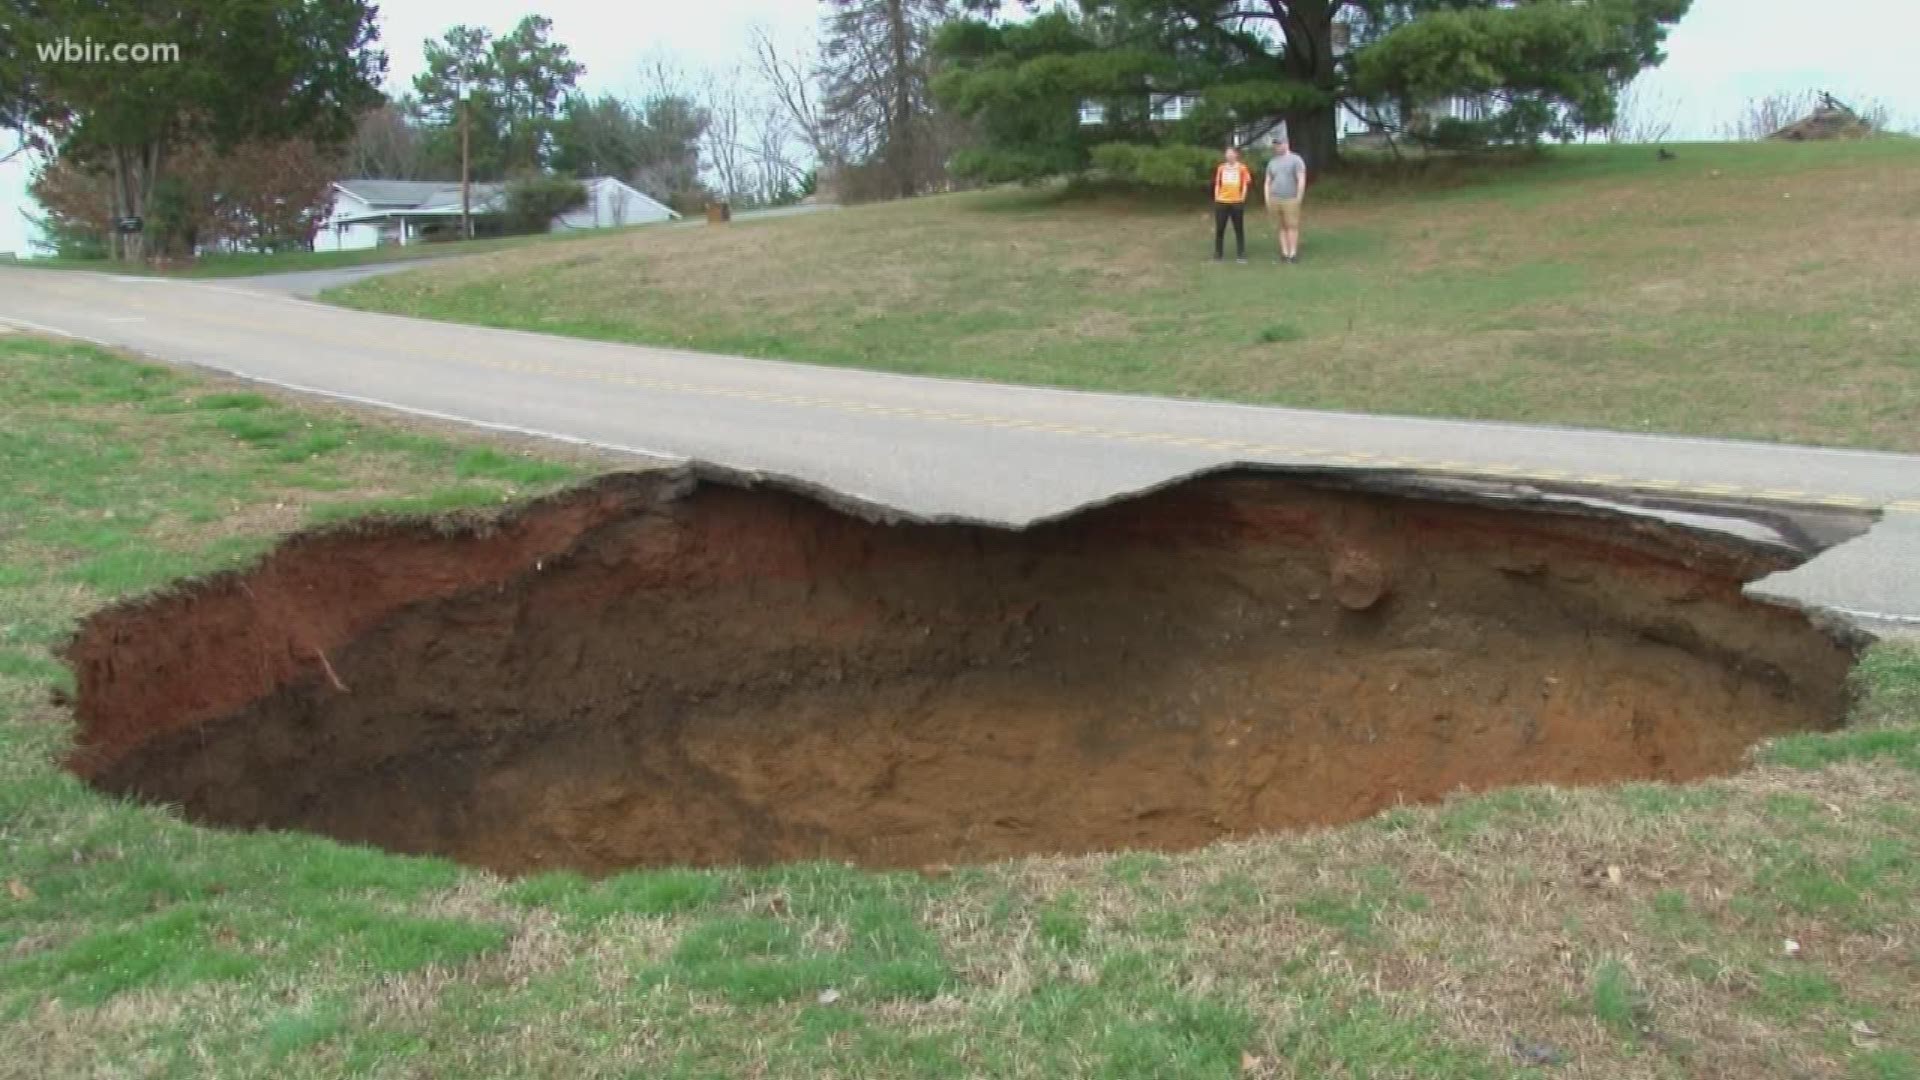 The sinkhole on Greenwell Rd. in Powell was about 25 feet wide and 60 feet deep, and still growing.